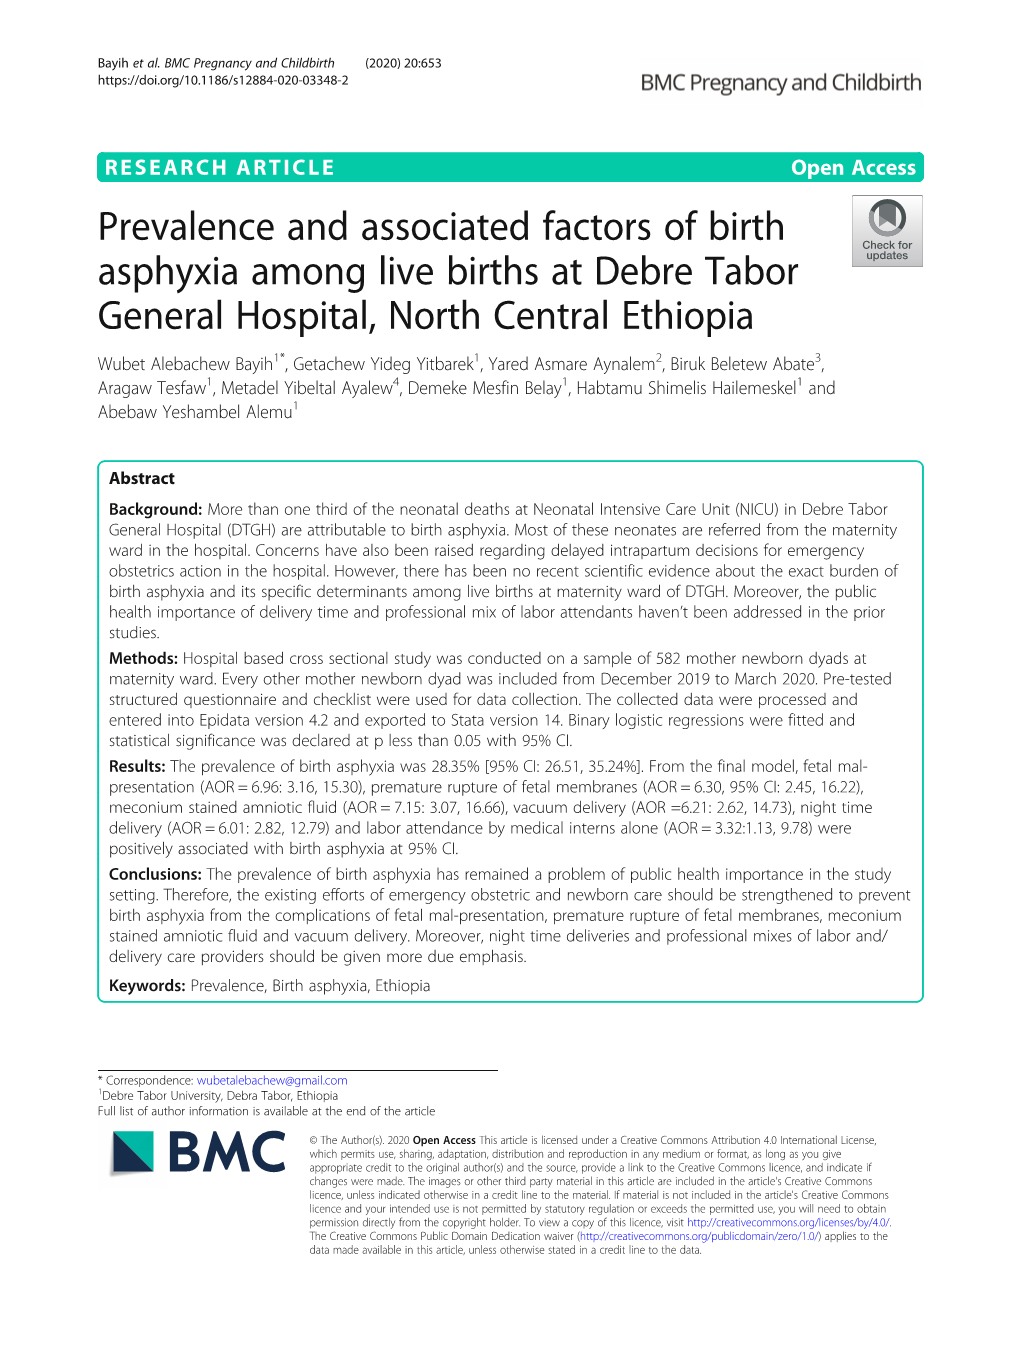 Prevalence and Associated Factors of Birth Asphyxia Among Live Births At